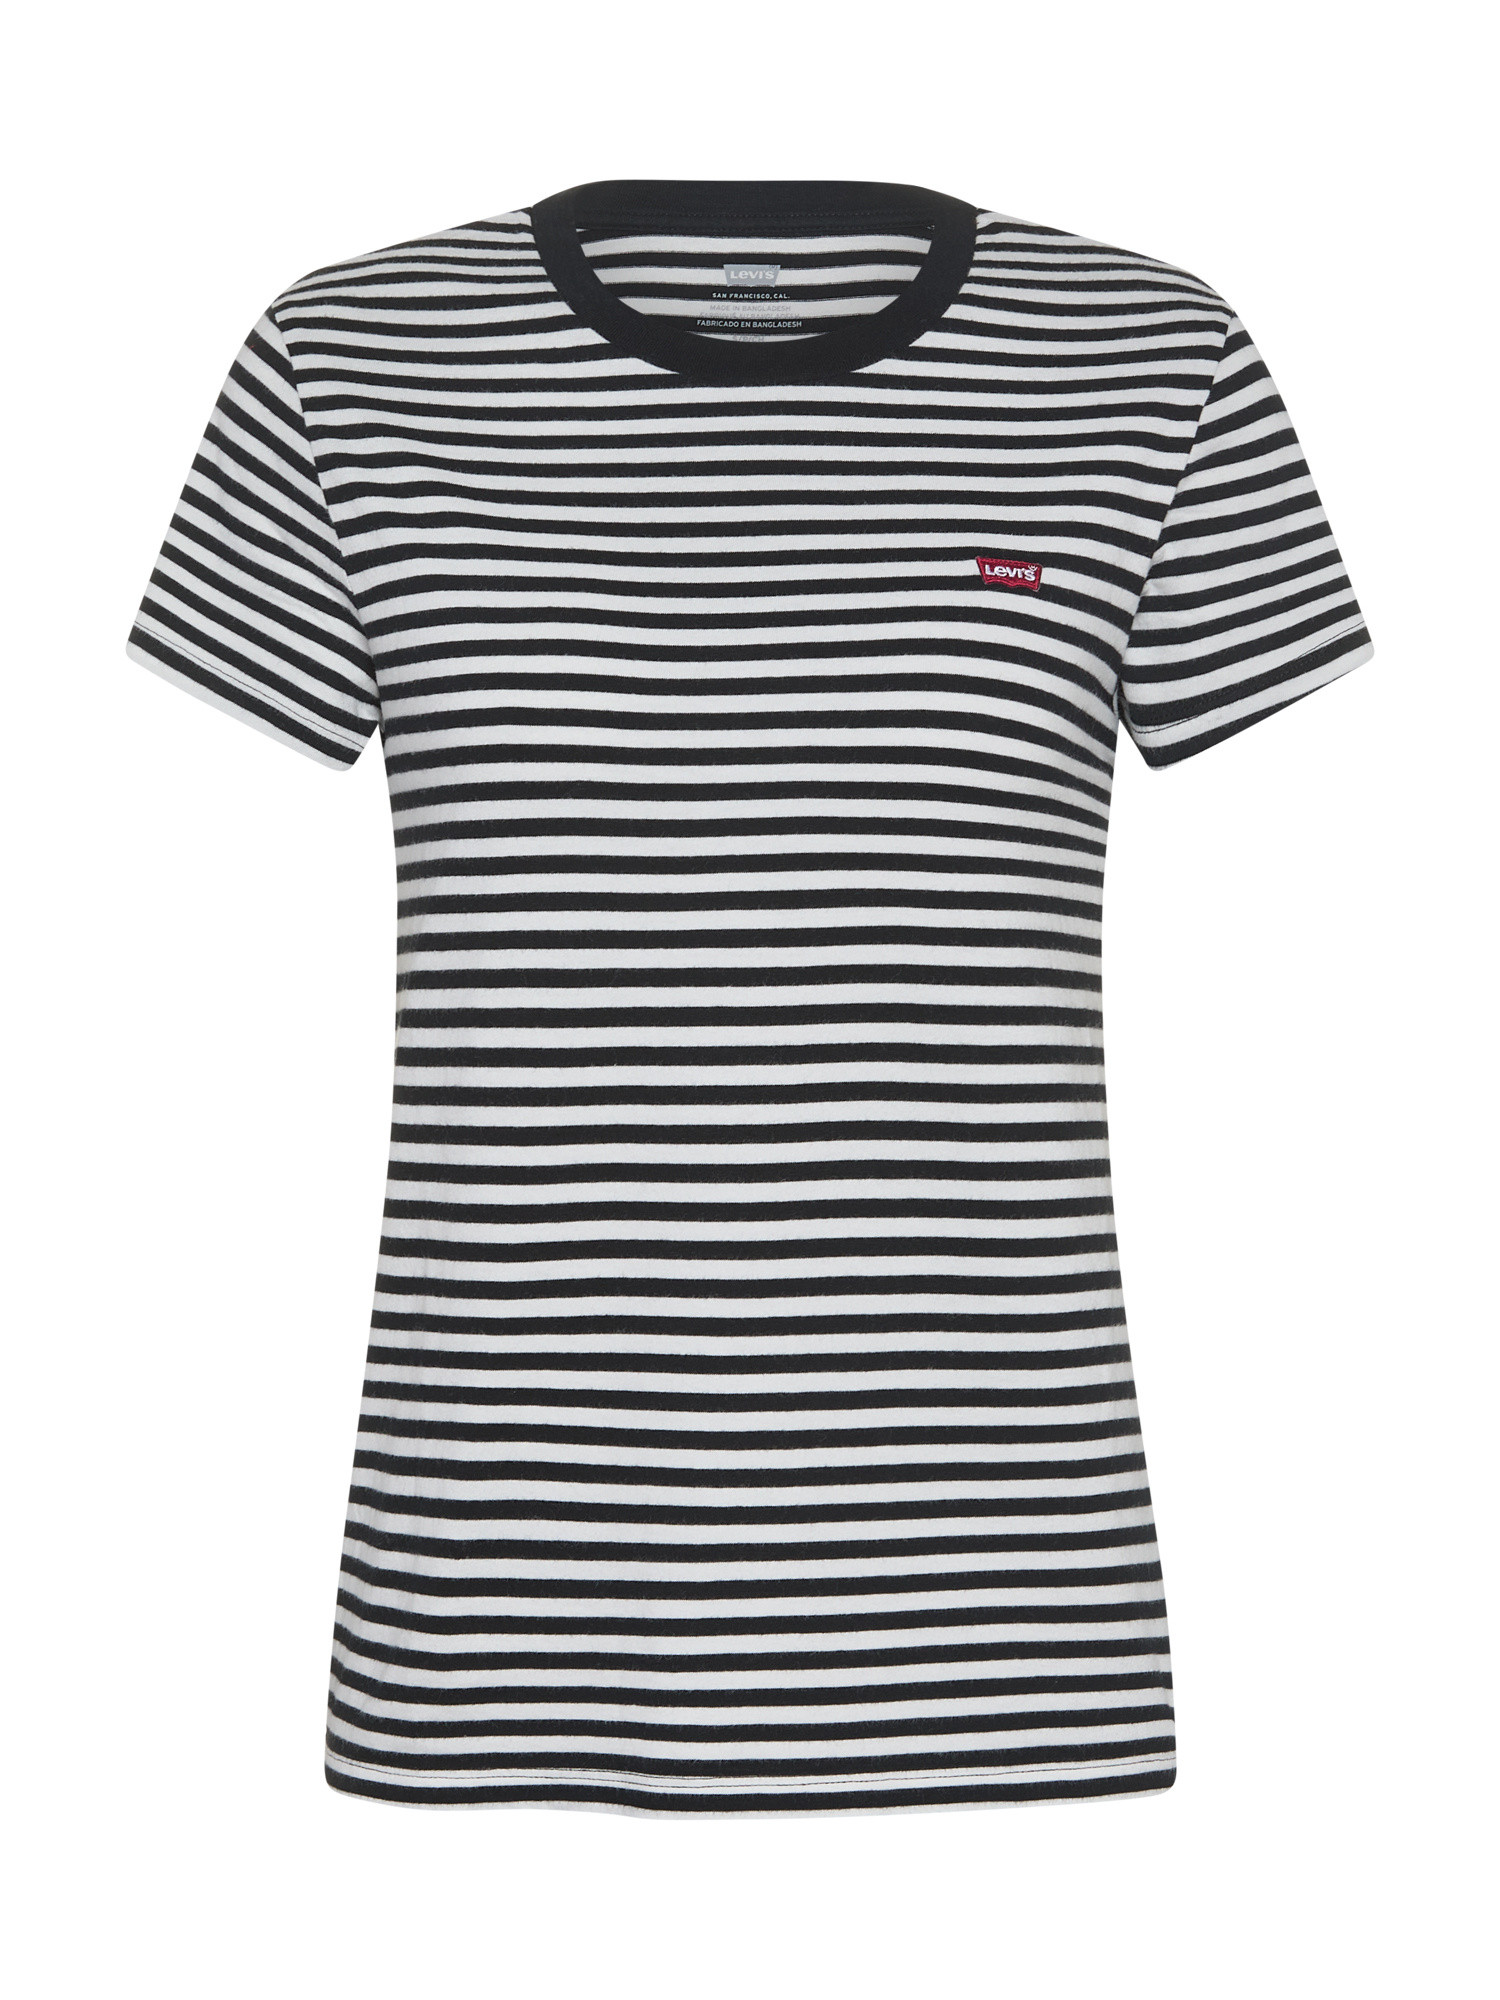 Levi's - Striped cotton T-shirt with logo, White, large image number 0